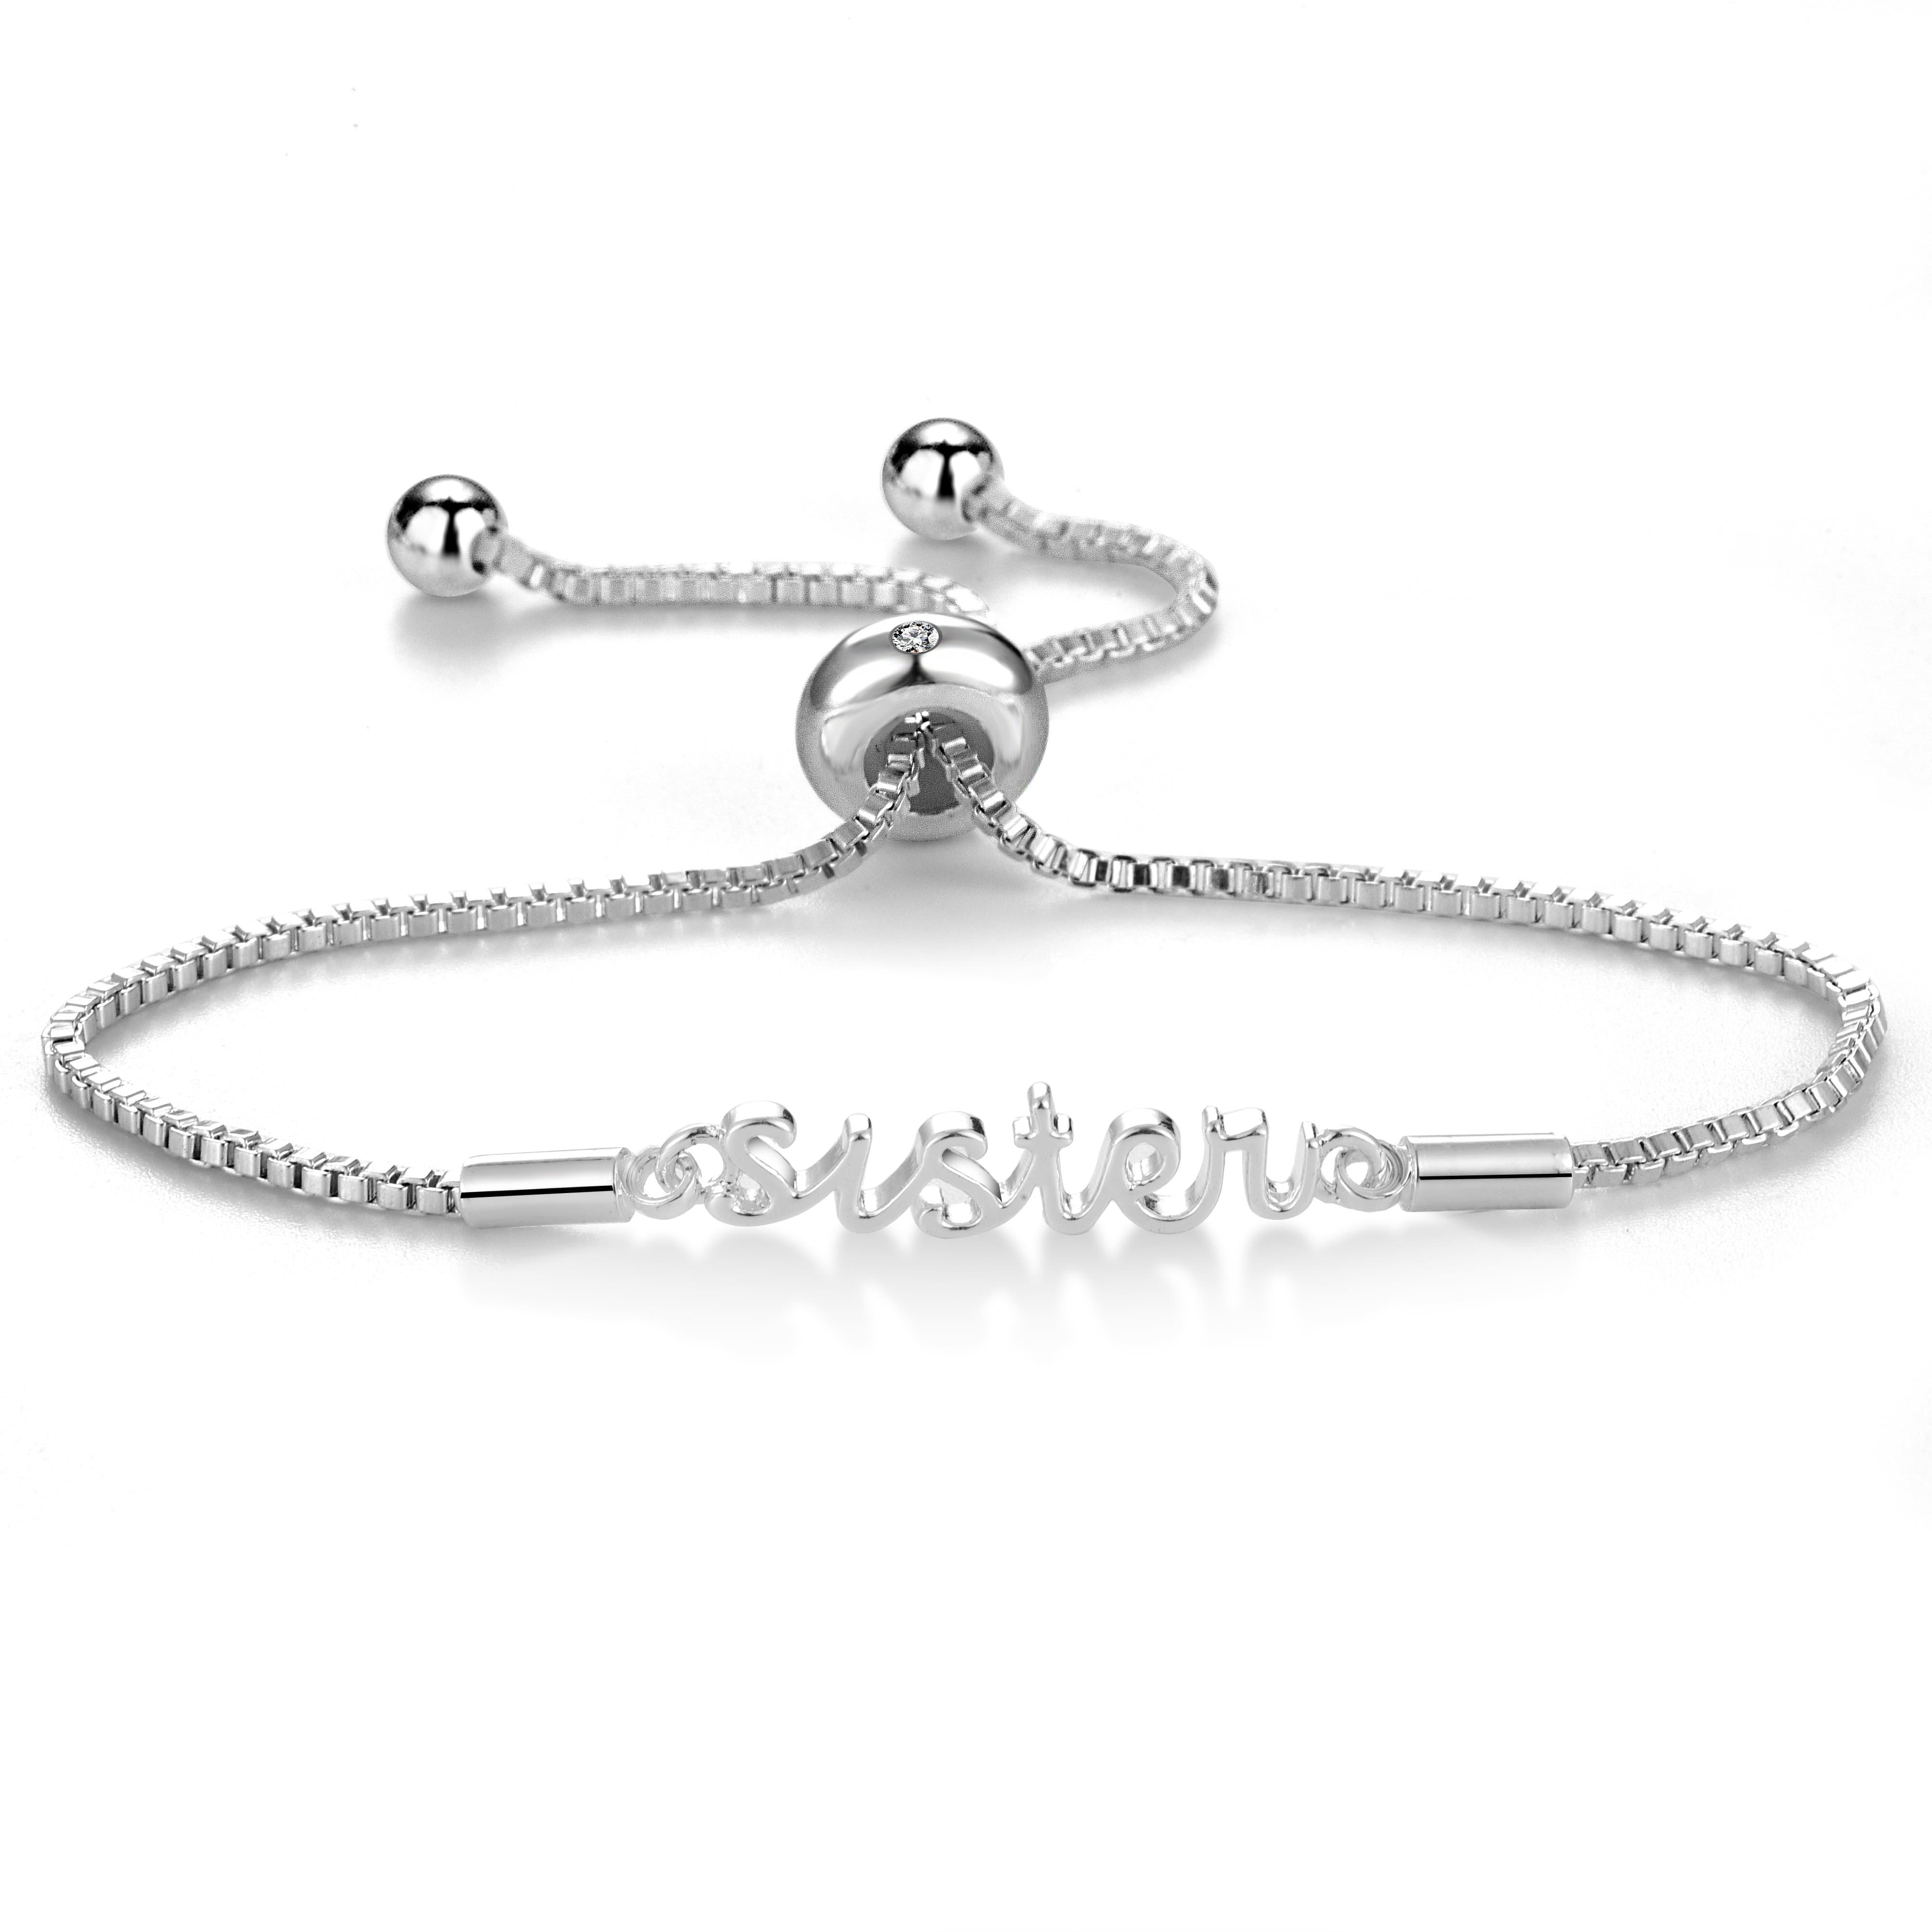 Silver Plated Sister Bracelet Created with Zircondia® Crystals by Philip Jones Jewellery